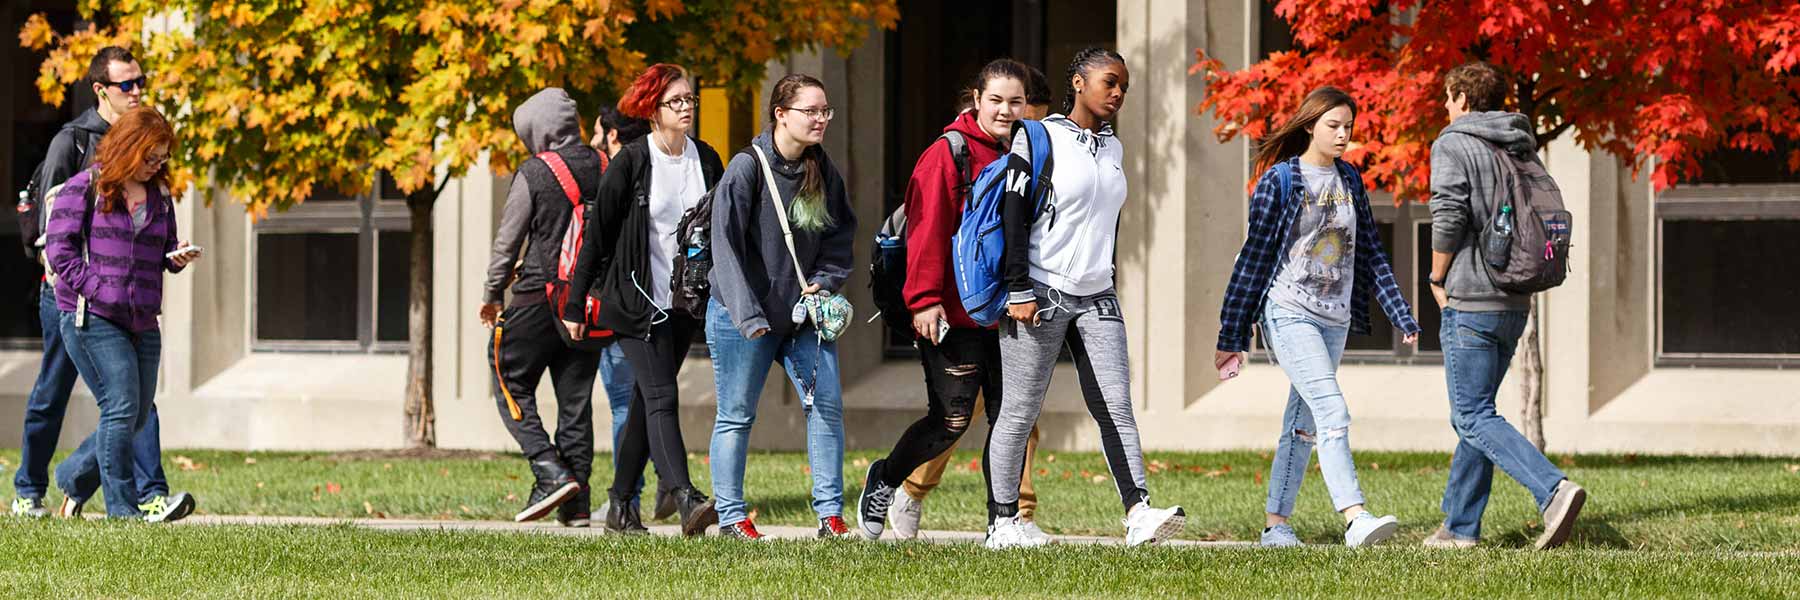 A group of students walks on campus.